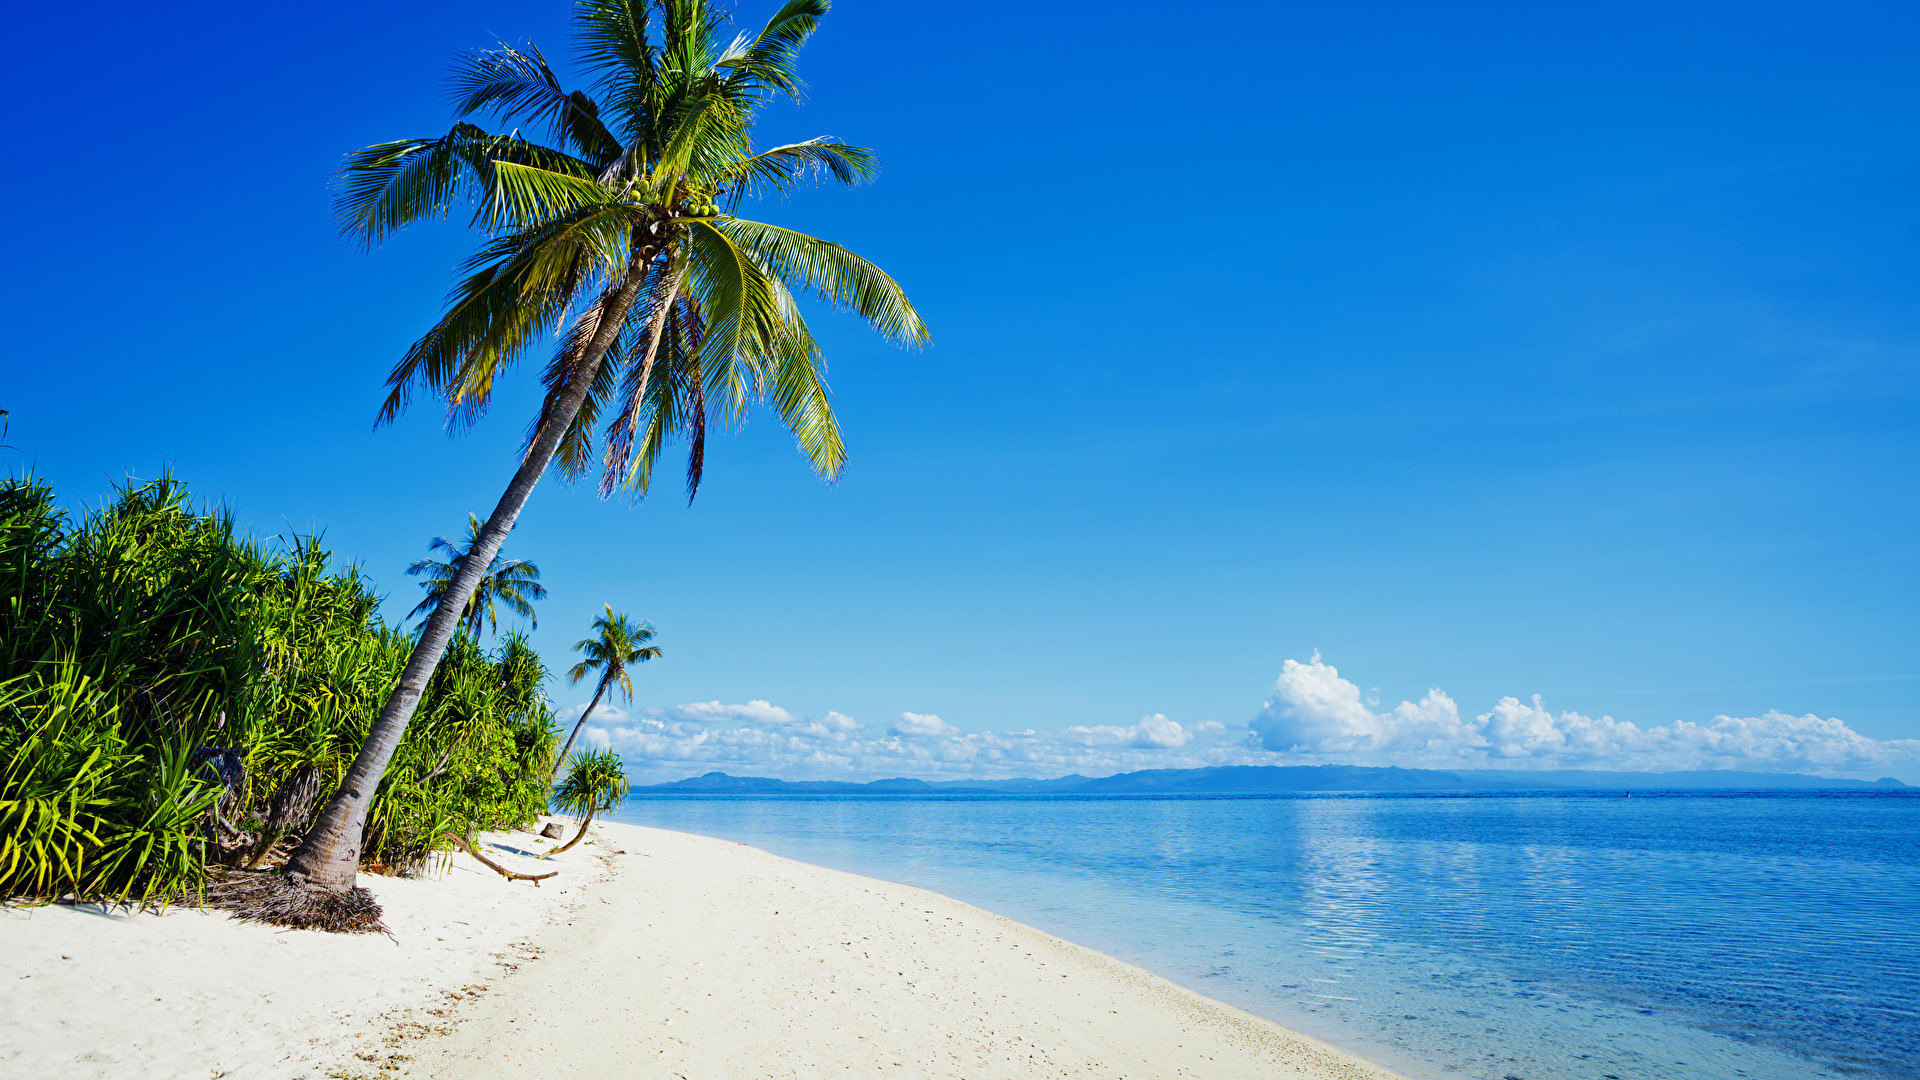 1920x1080 Tropical Beaches With Palm Trees S Wallpaper Desktop Background Is Cool  Wallpapers